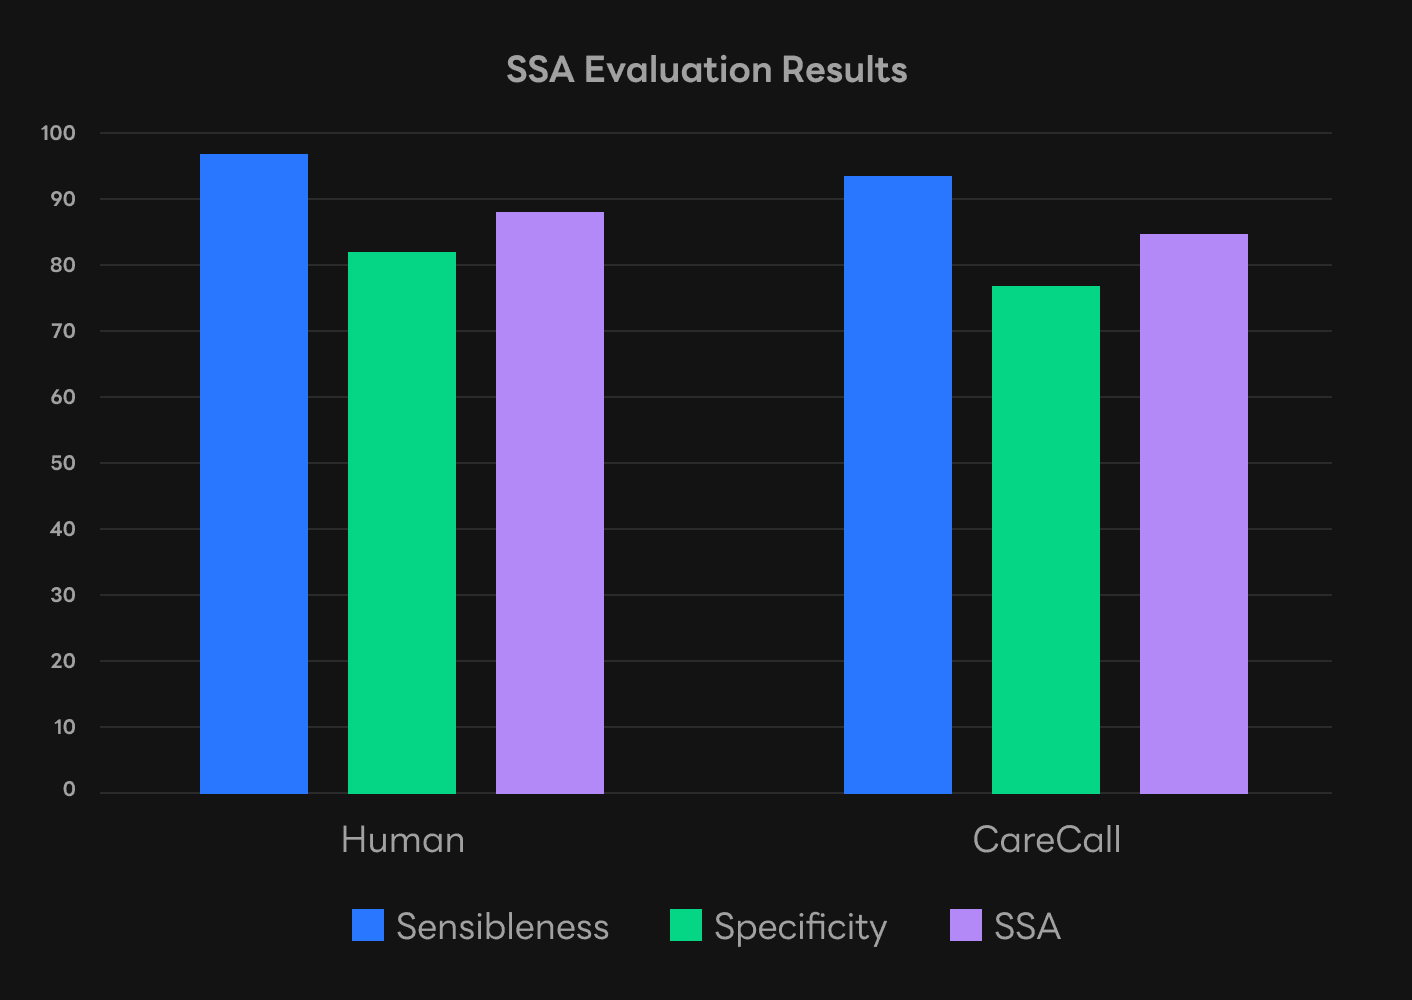 Results from SSA evaluation